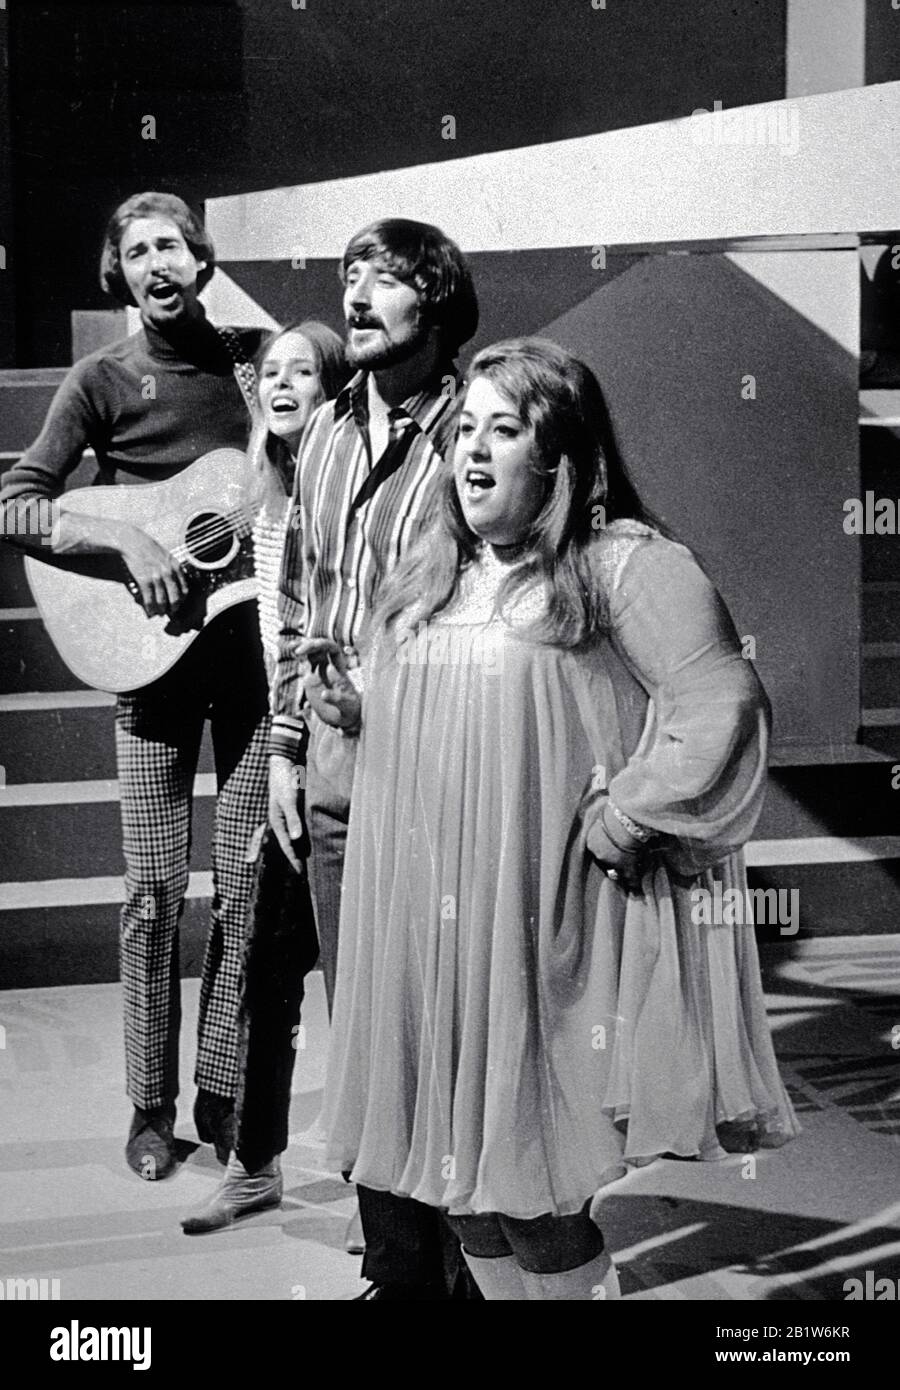 John Phillips, Michell Phillips, Mama Cass Elliot, Denny Doherty, (The Mamas and the Papas) Performing, 1970 File Reference # 33962-262THA Stockfoto